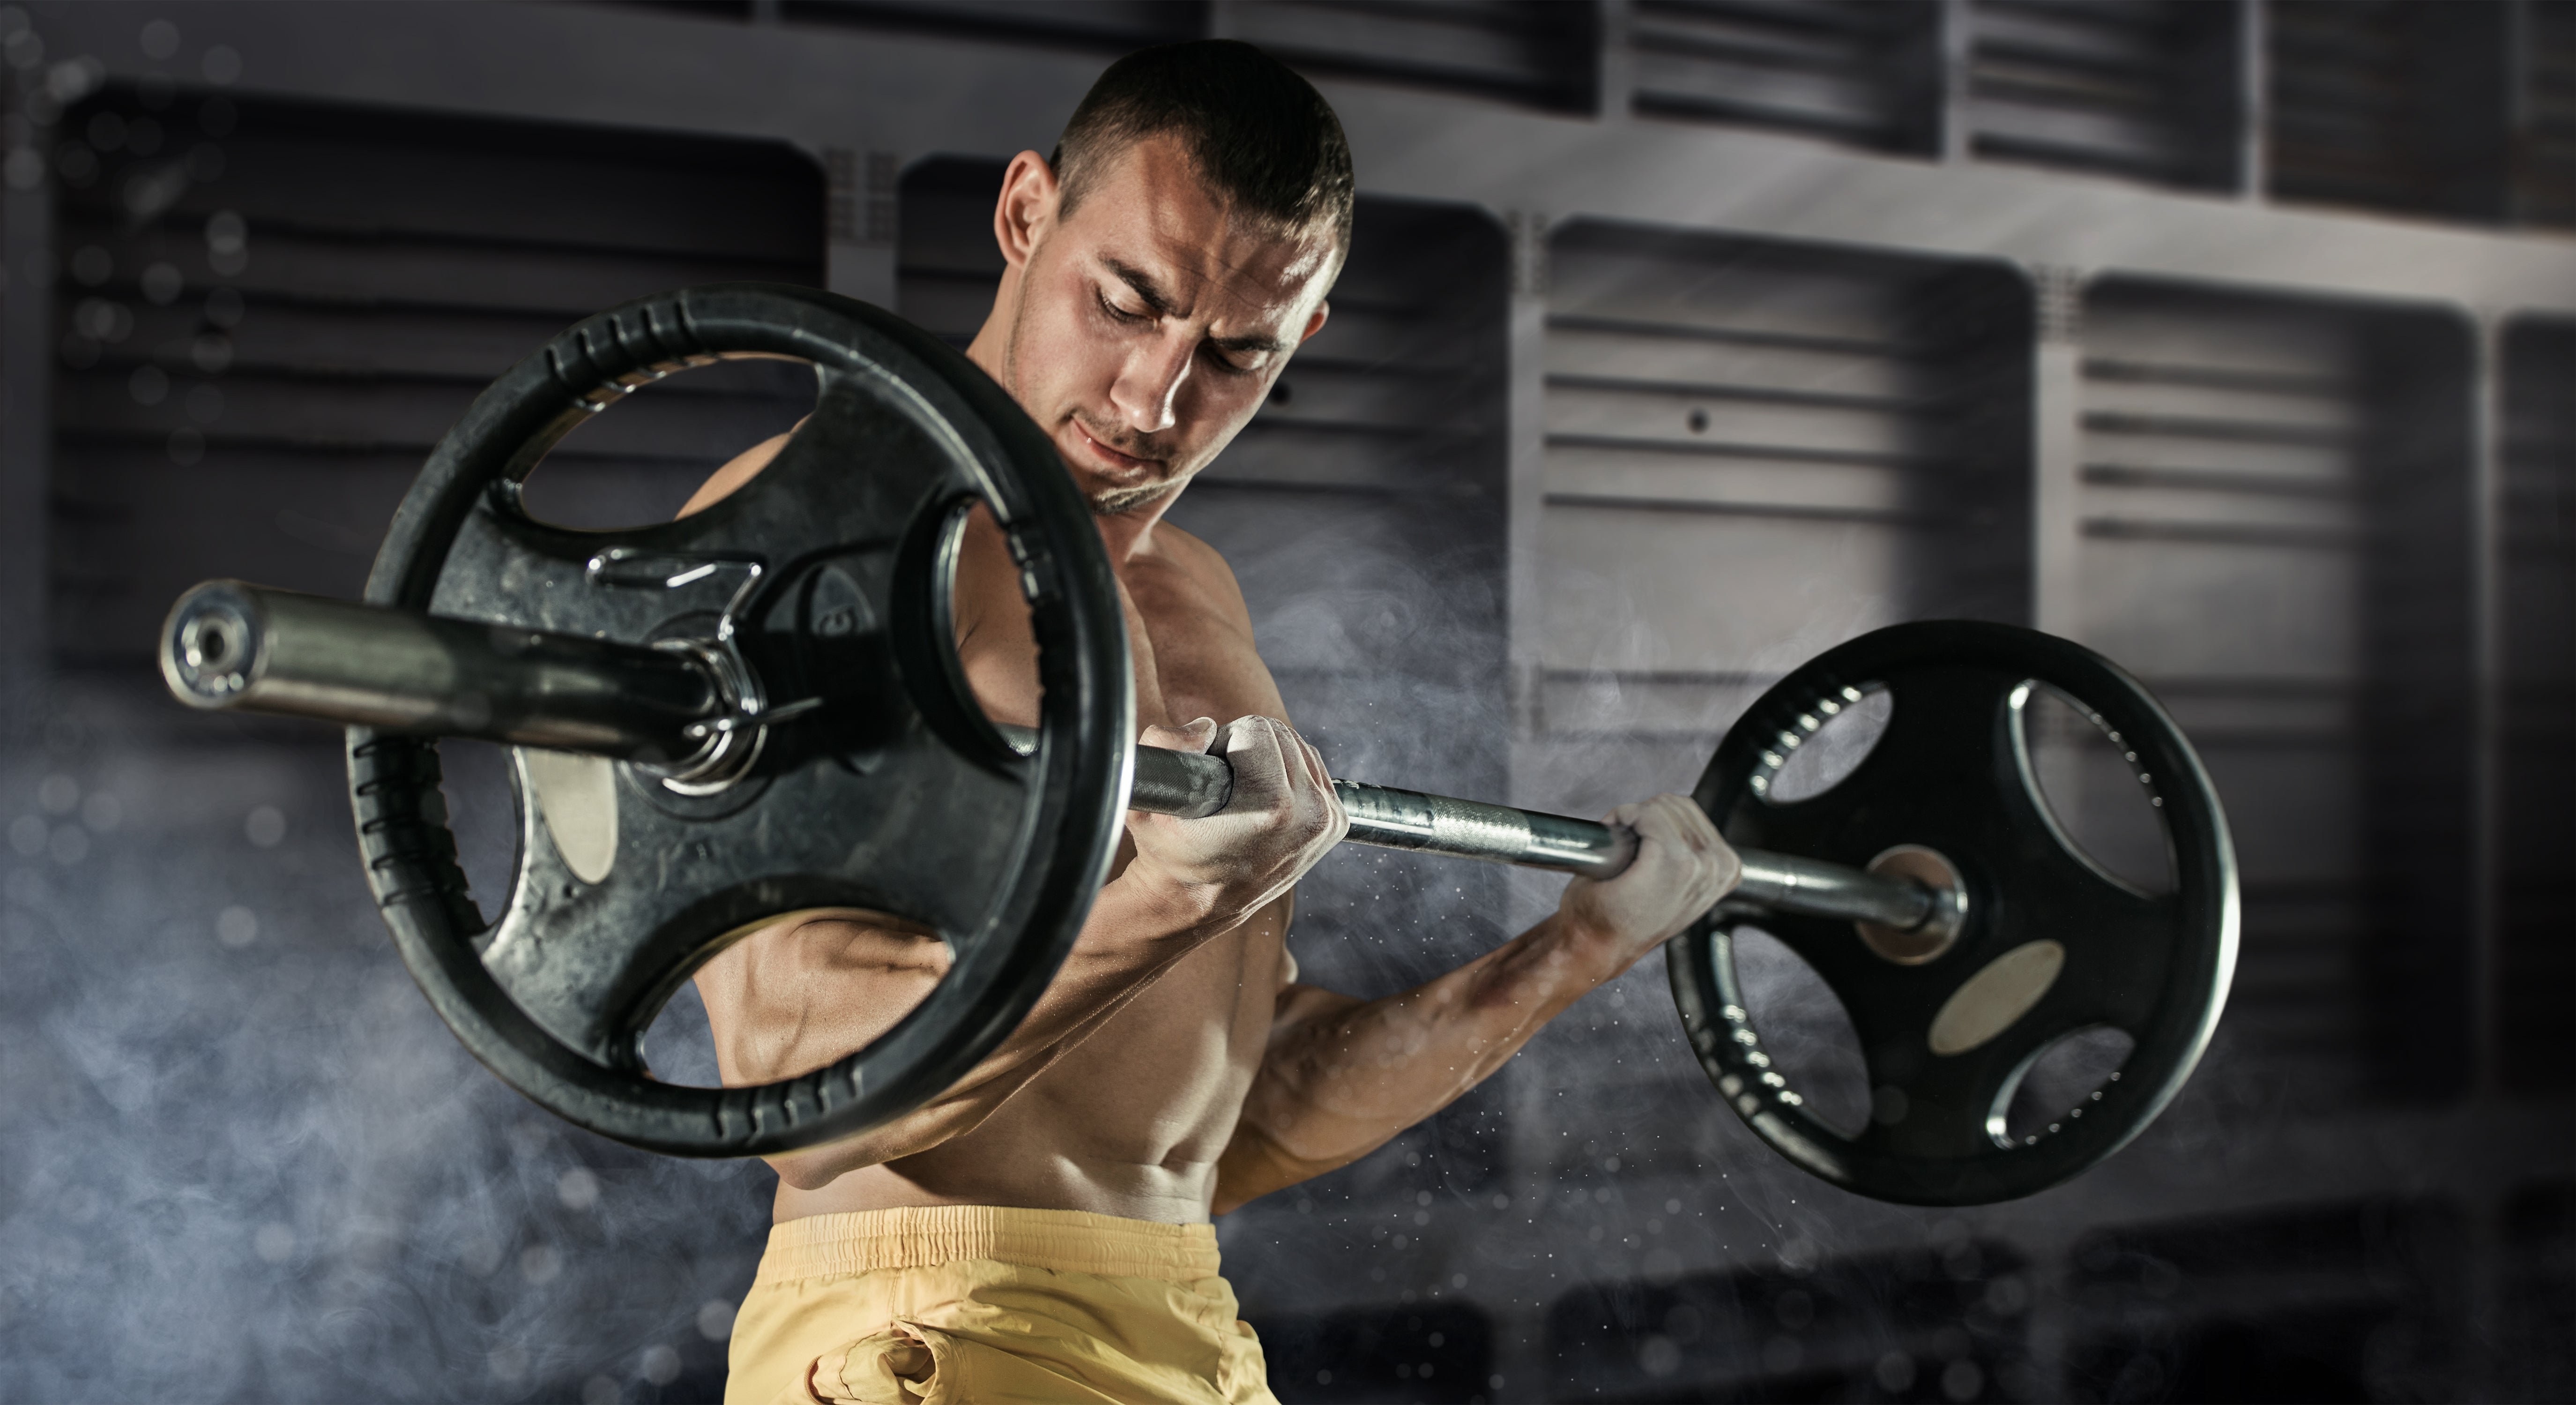 Barbell Complex Workout  Perfect Way To Maximize Time, Build